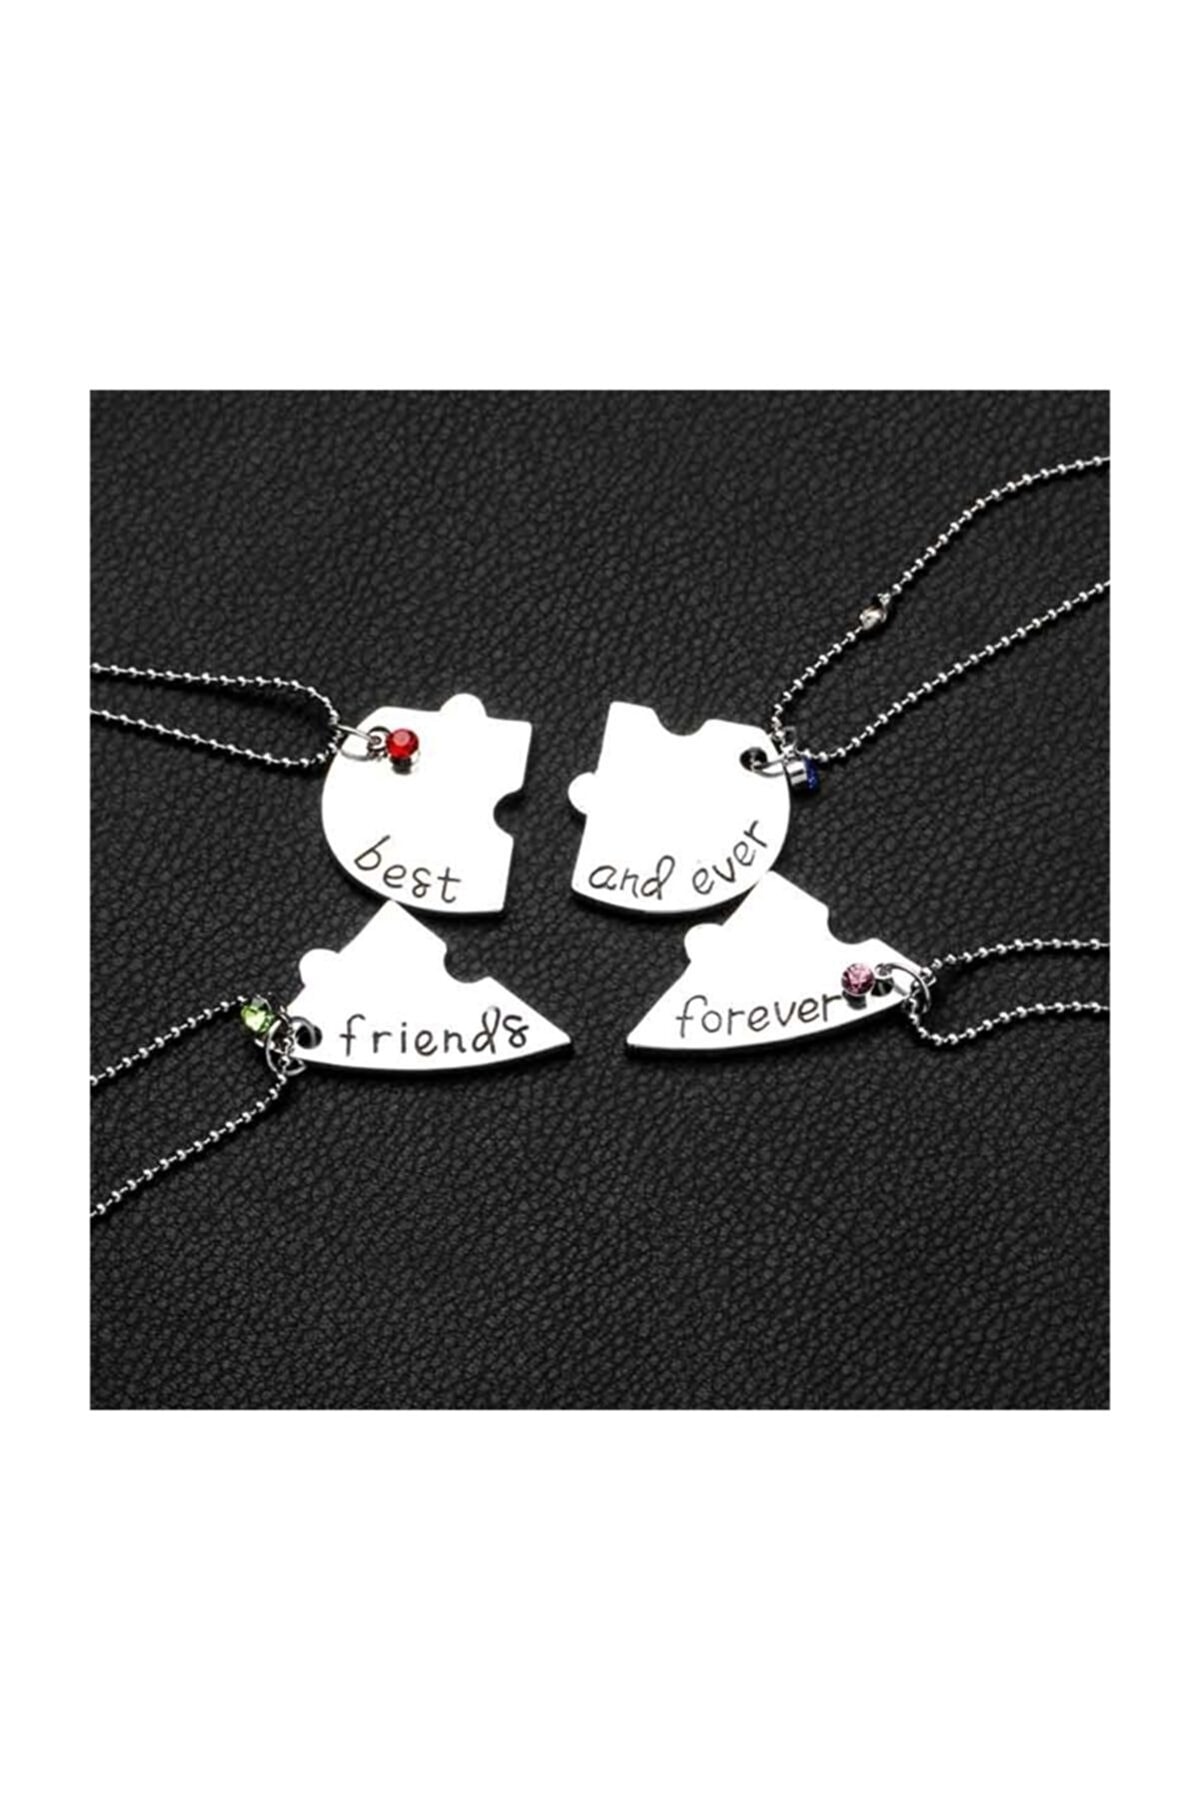 ChainsHouse Puzzle Friendship Necklace Stainless Steel BFF Necklace, 2/3/4/5/6/7/8pcs  Personalized Matching Heart Pendant Friendship Necklaces for Women Men,  Send Gift Box - Walmart.com